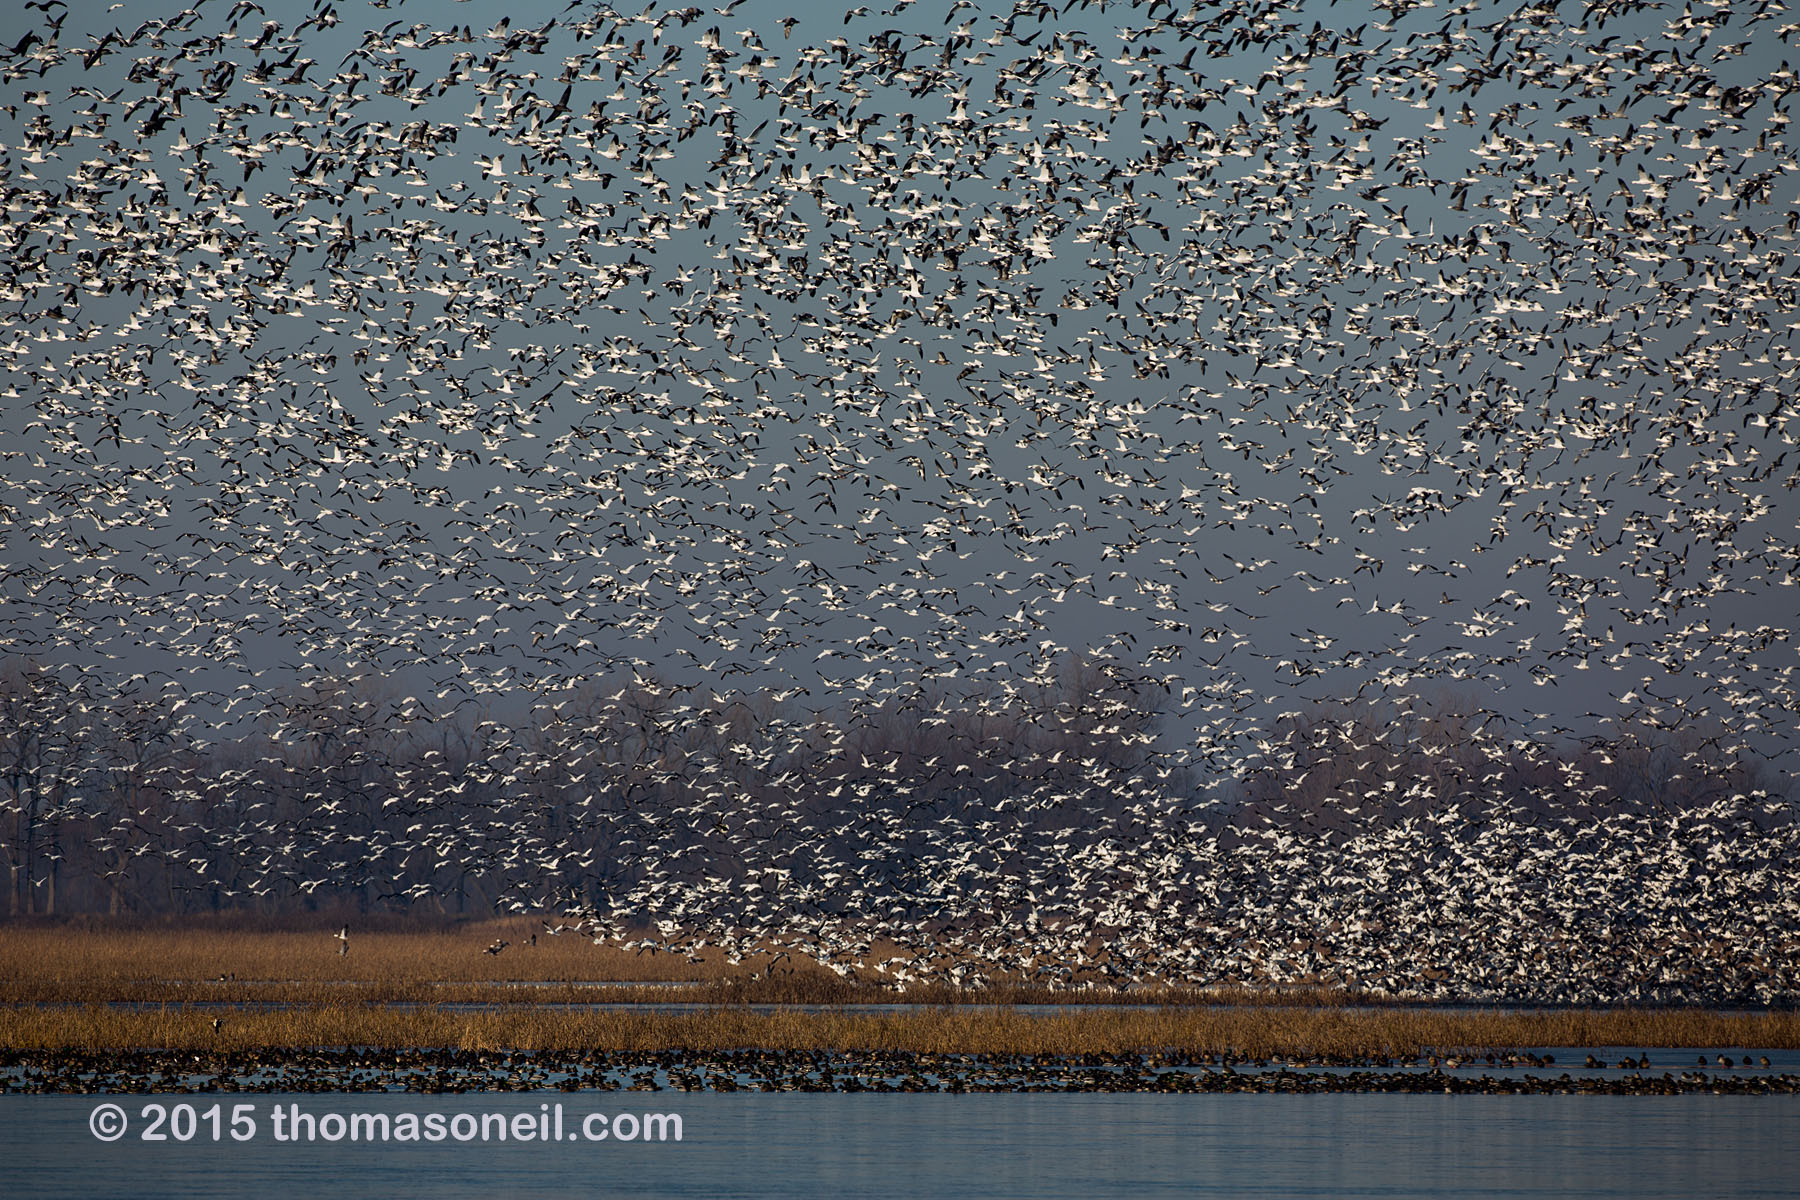 Snow geese, Squaw Creek NWR, Missouri, December 2015.  Click for next photo.